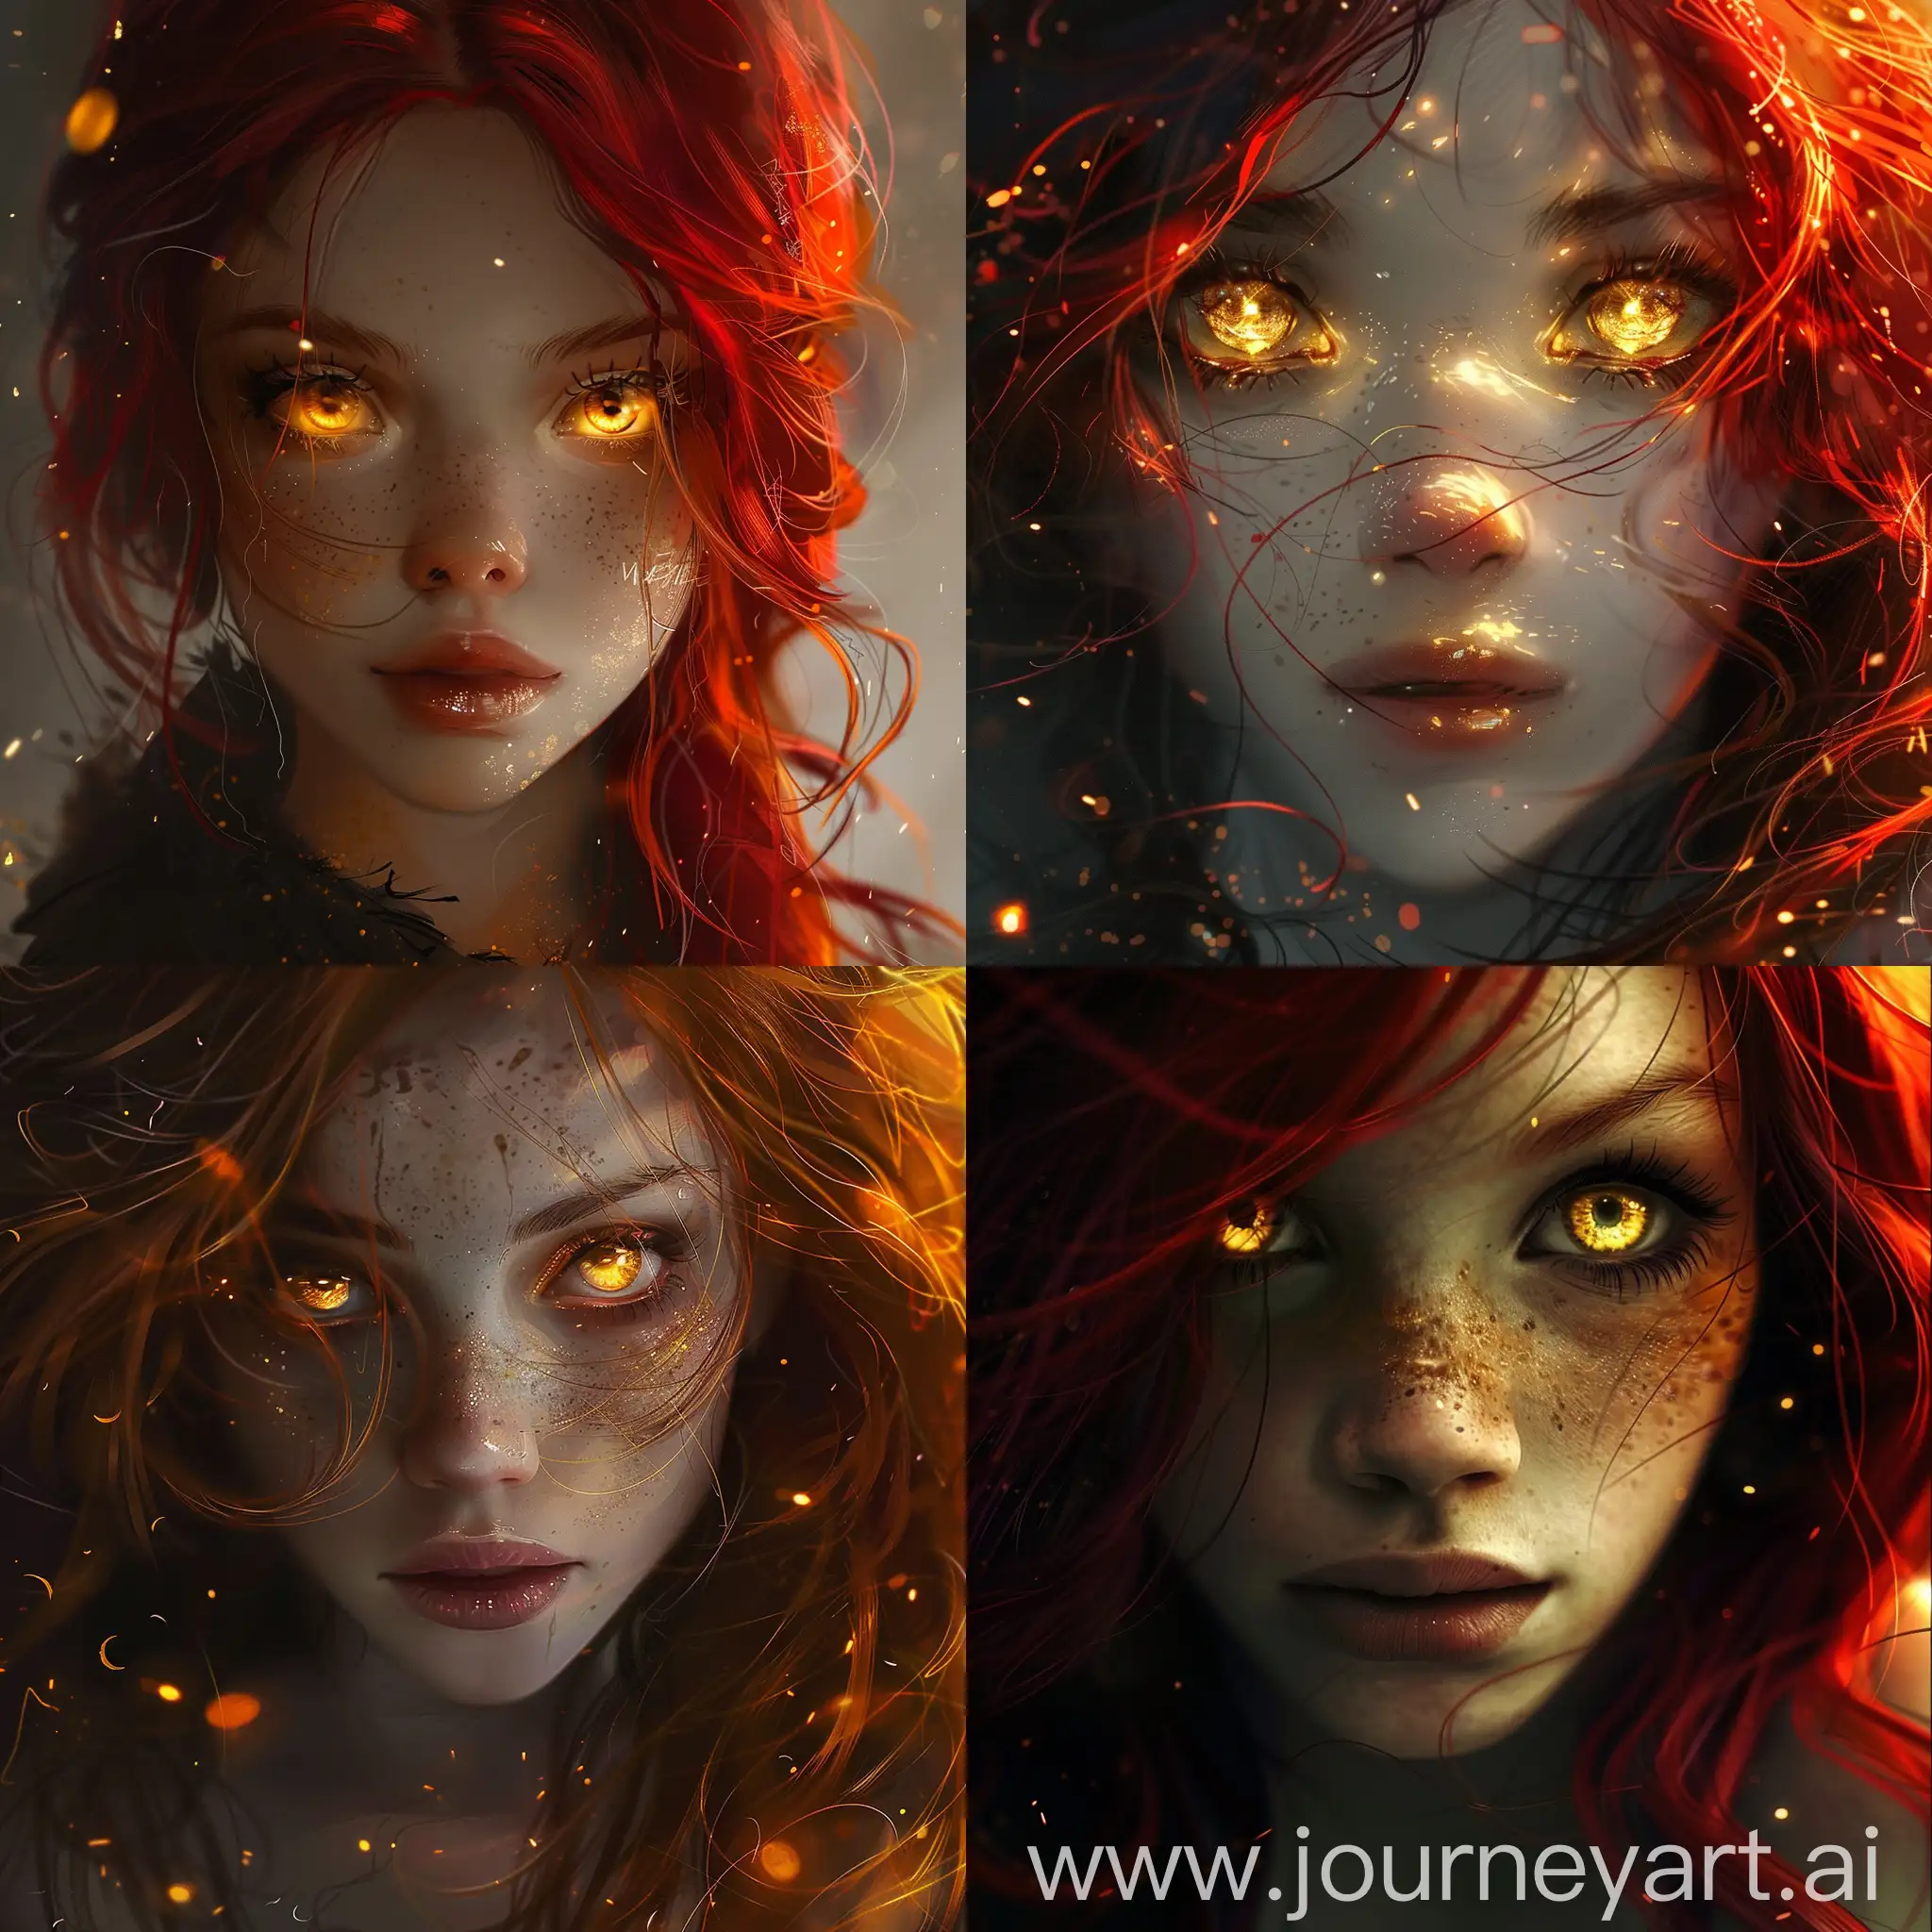 RedHaired-Girl-with-Golden-Eyes-Portrait